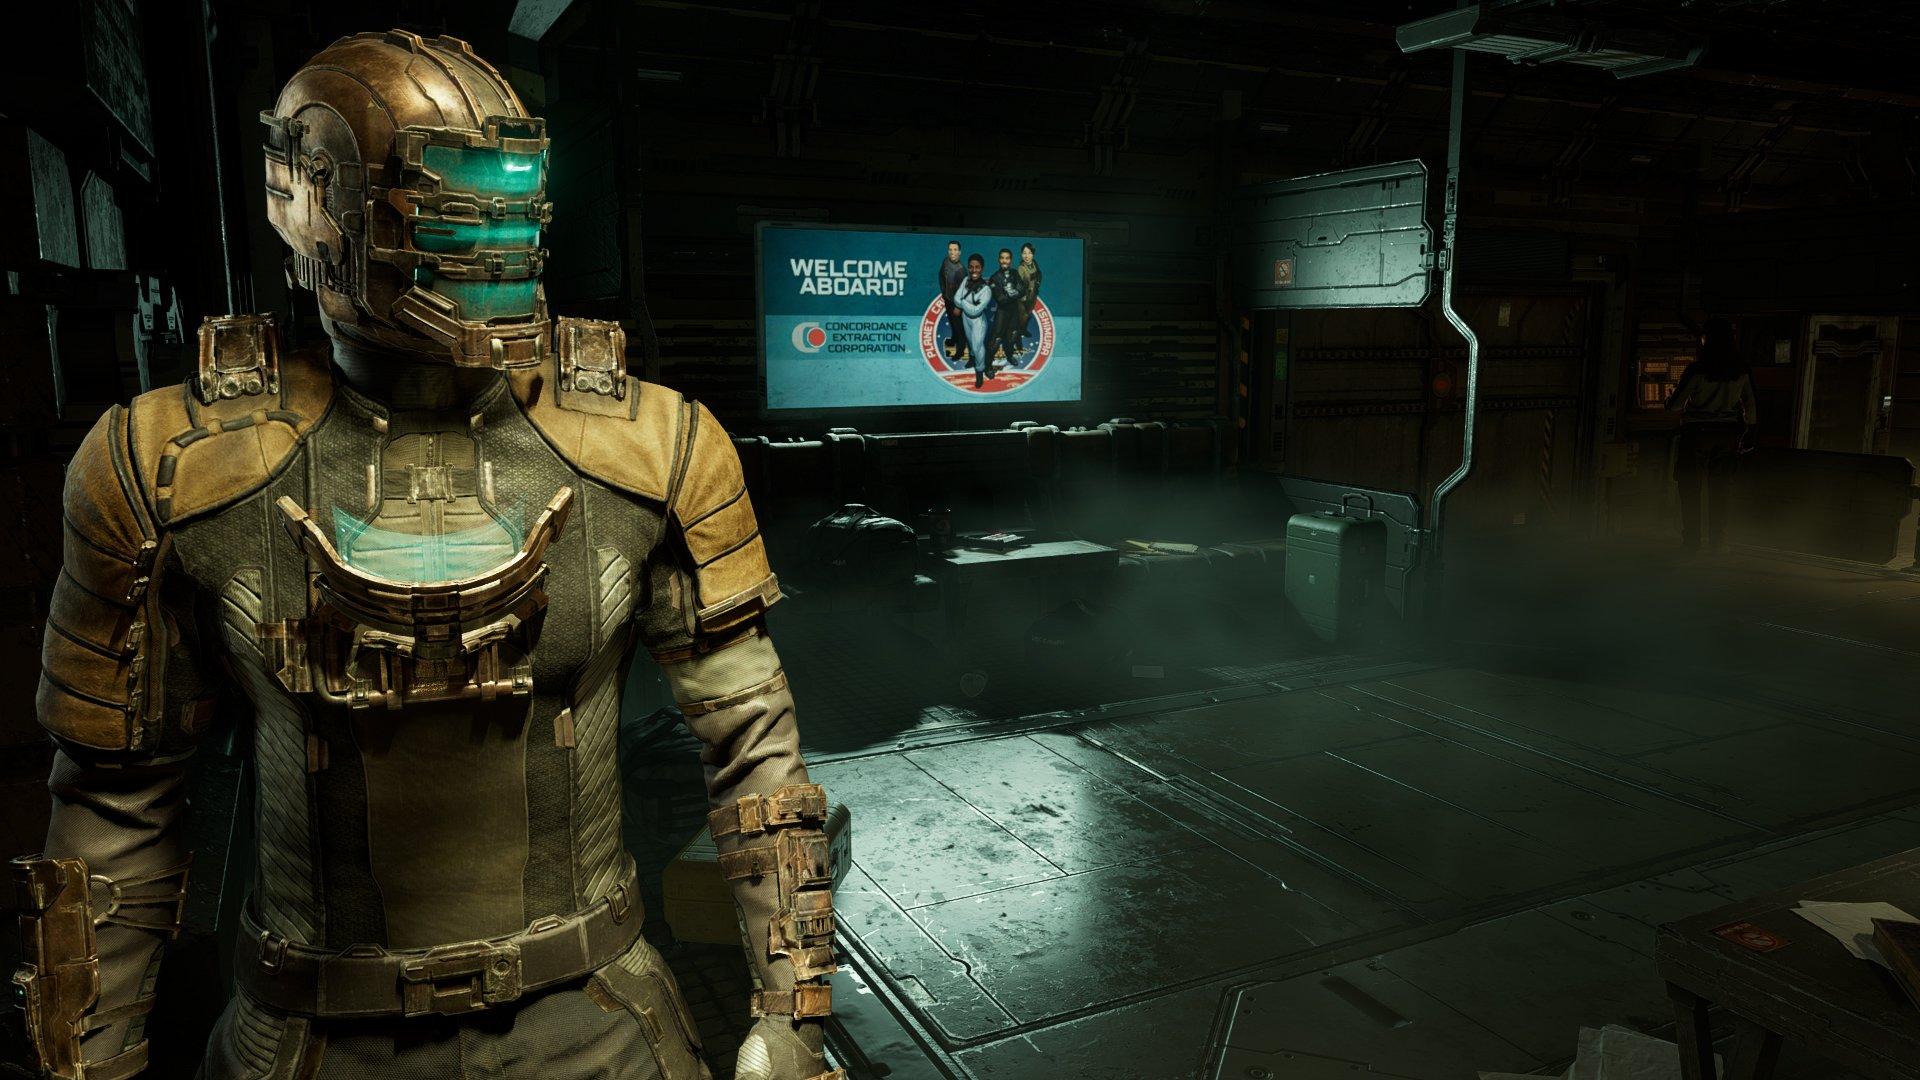 DEAD SPACE - Isaac Clarke Level 3 Suit Complete Cosplay Build : 17